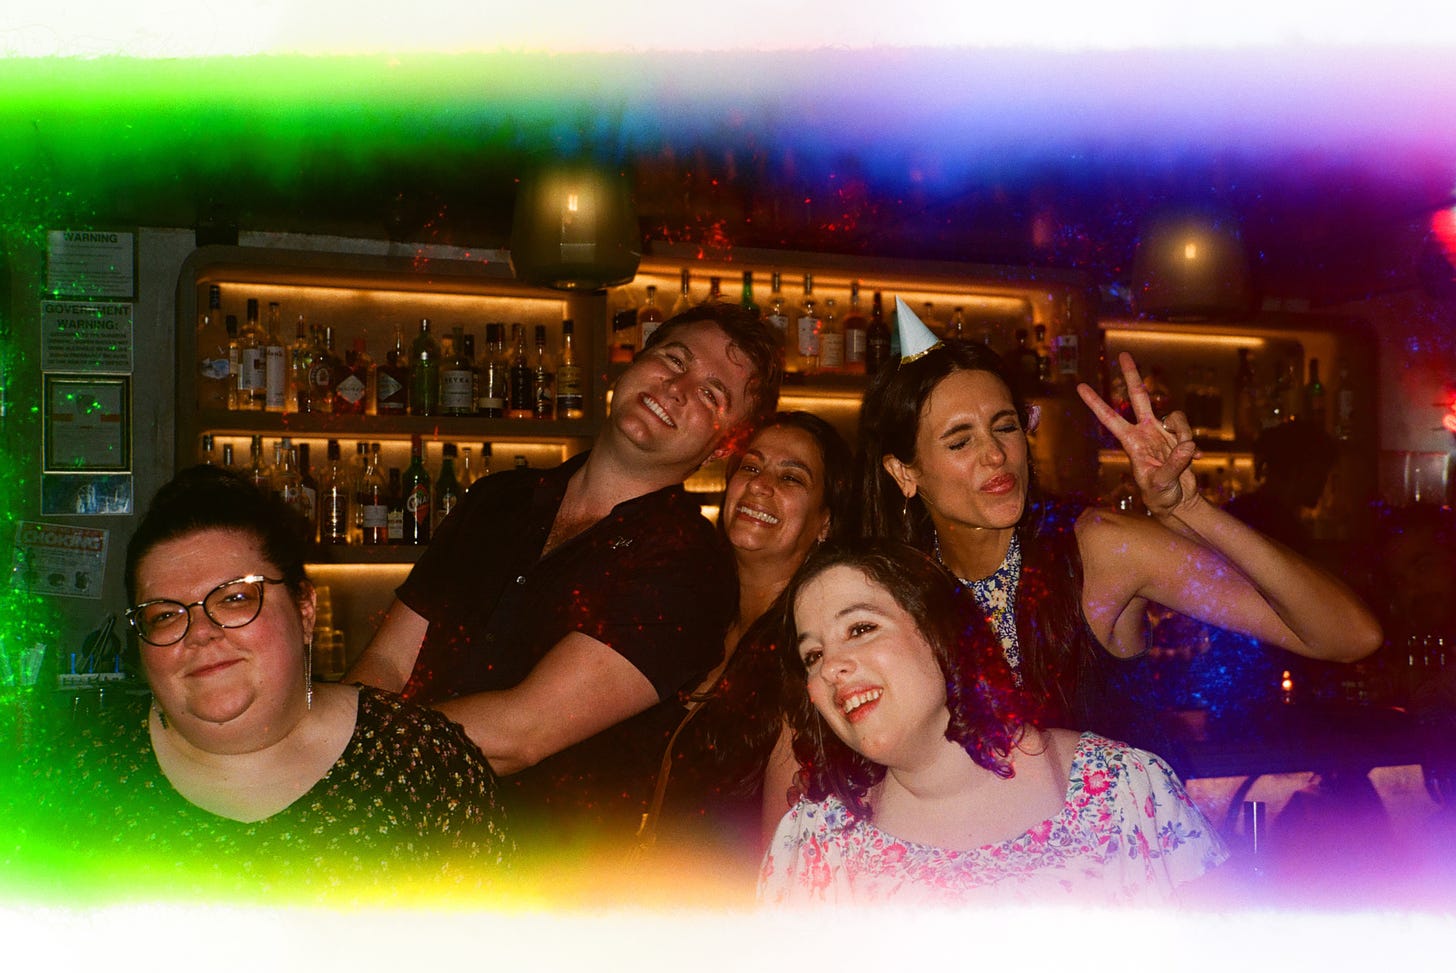 Emily Ladau, Dylan Bulkeley-Krane, Maysoon Zayid, Anastasia Somoza on my birthday this year. Photo by: Christine Ng everyone is smiling into the camera